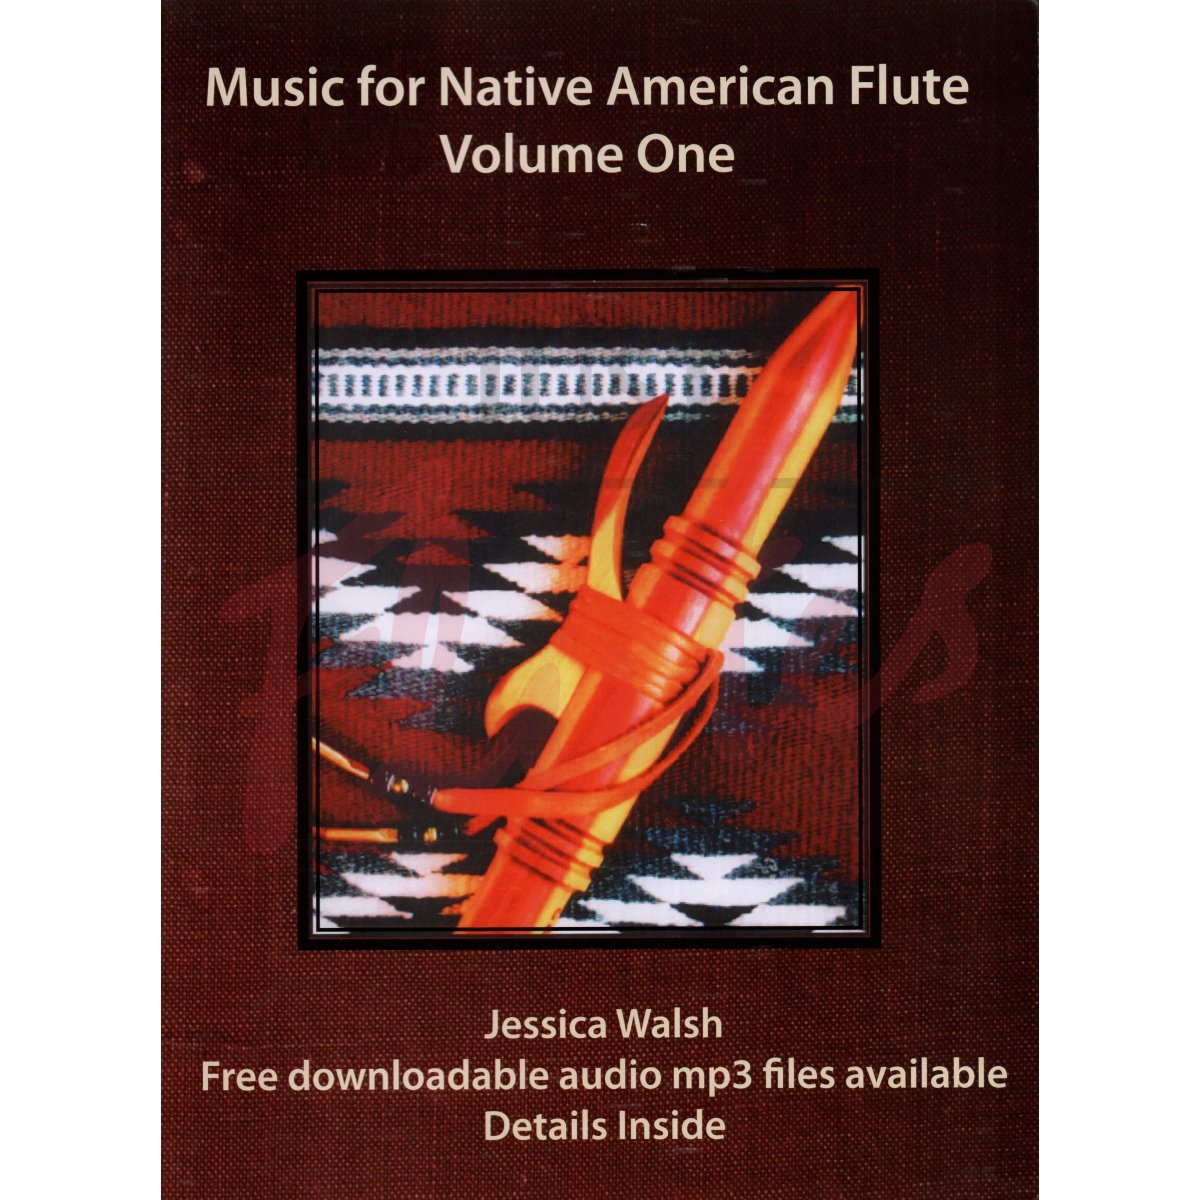 Music for Native American Flute